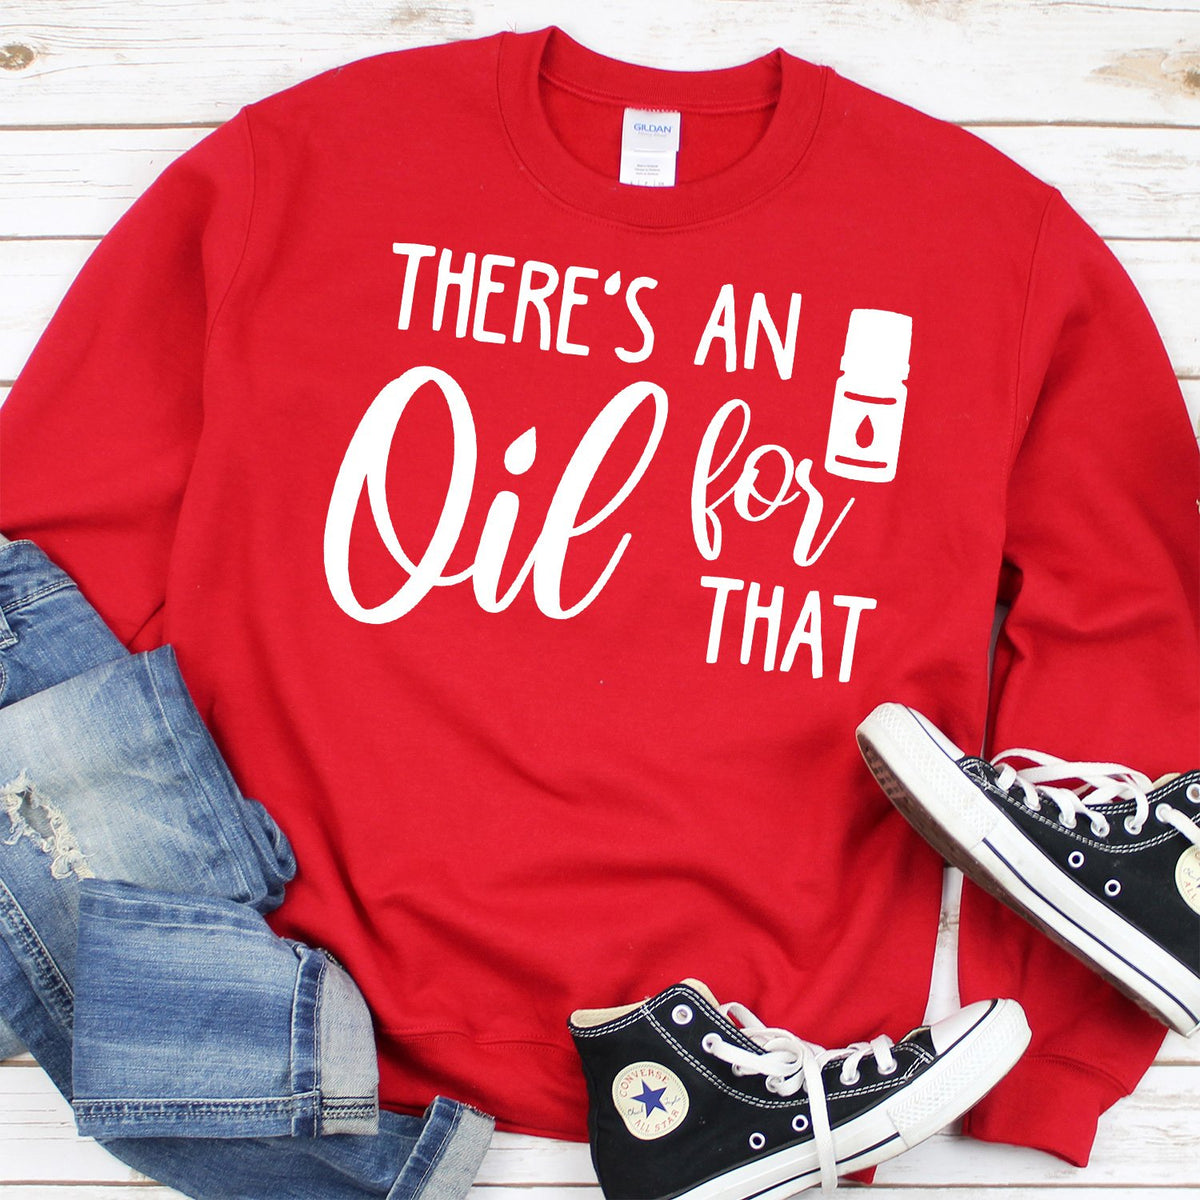 There&#39;s An Oil For That - Long Sleeve Heavy Crewneck Sweatshirt